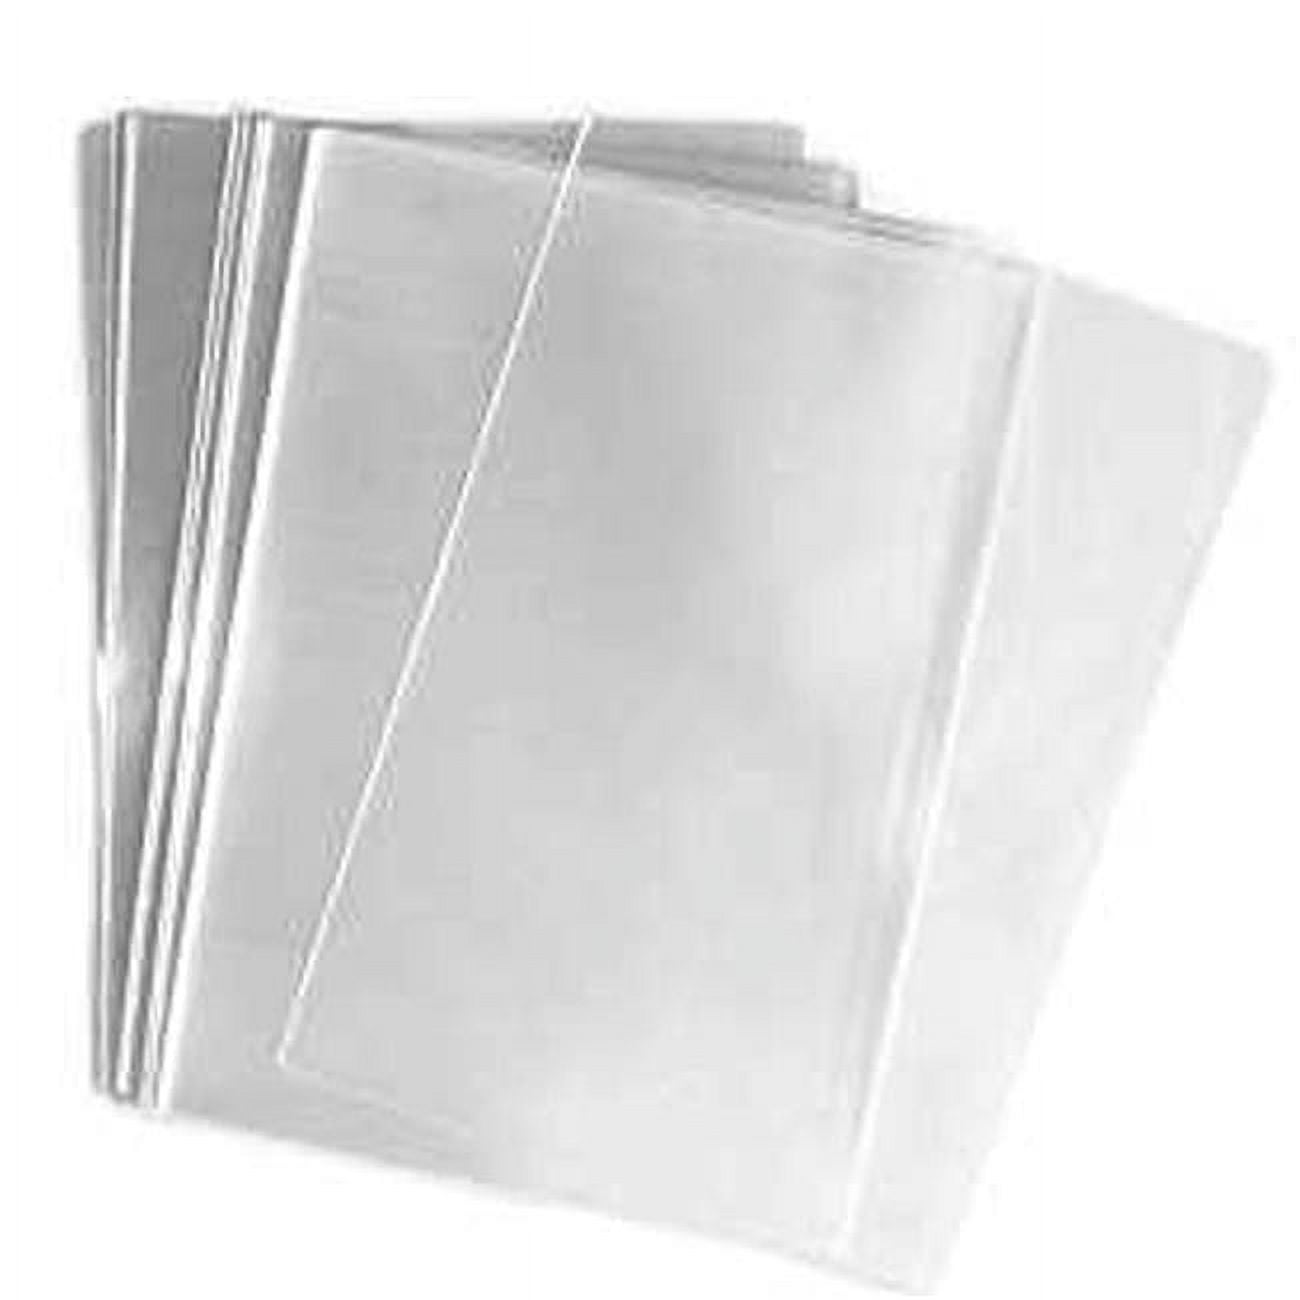 Fl0507c1 Pe 5 X 7 In. Clear Cello Cookie Bag - Pack Of 1000